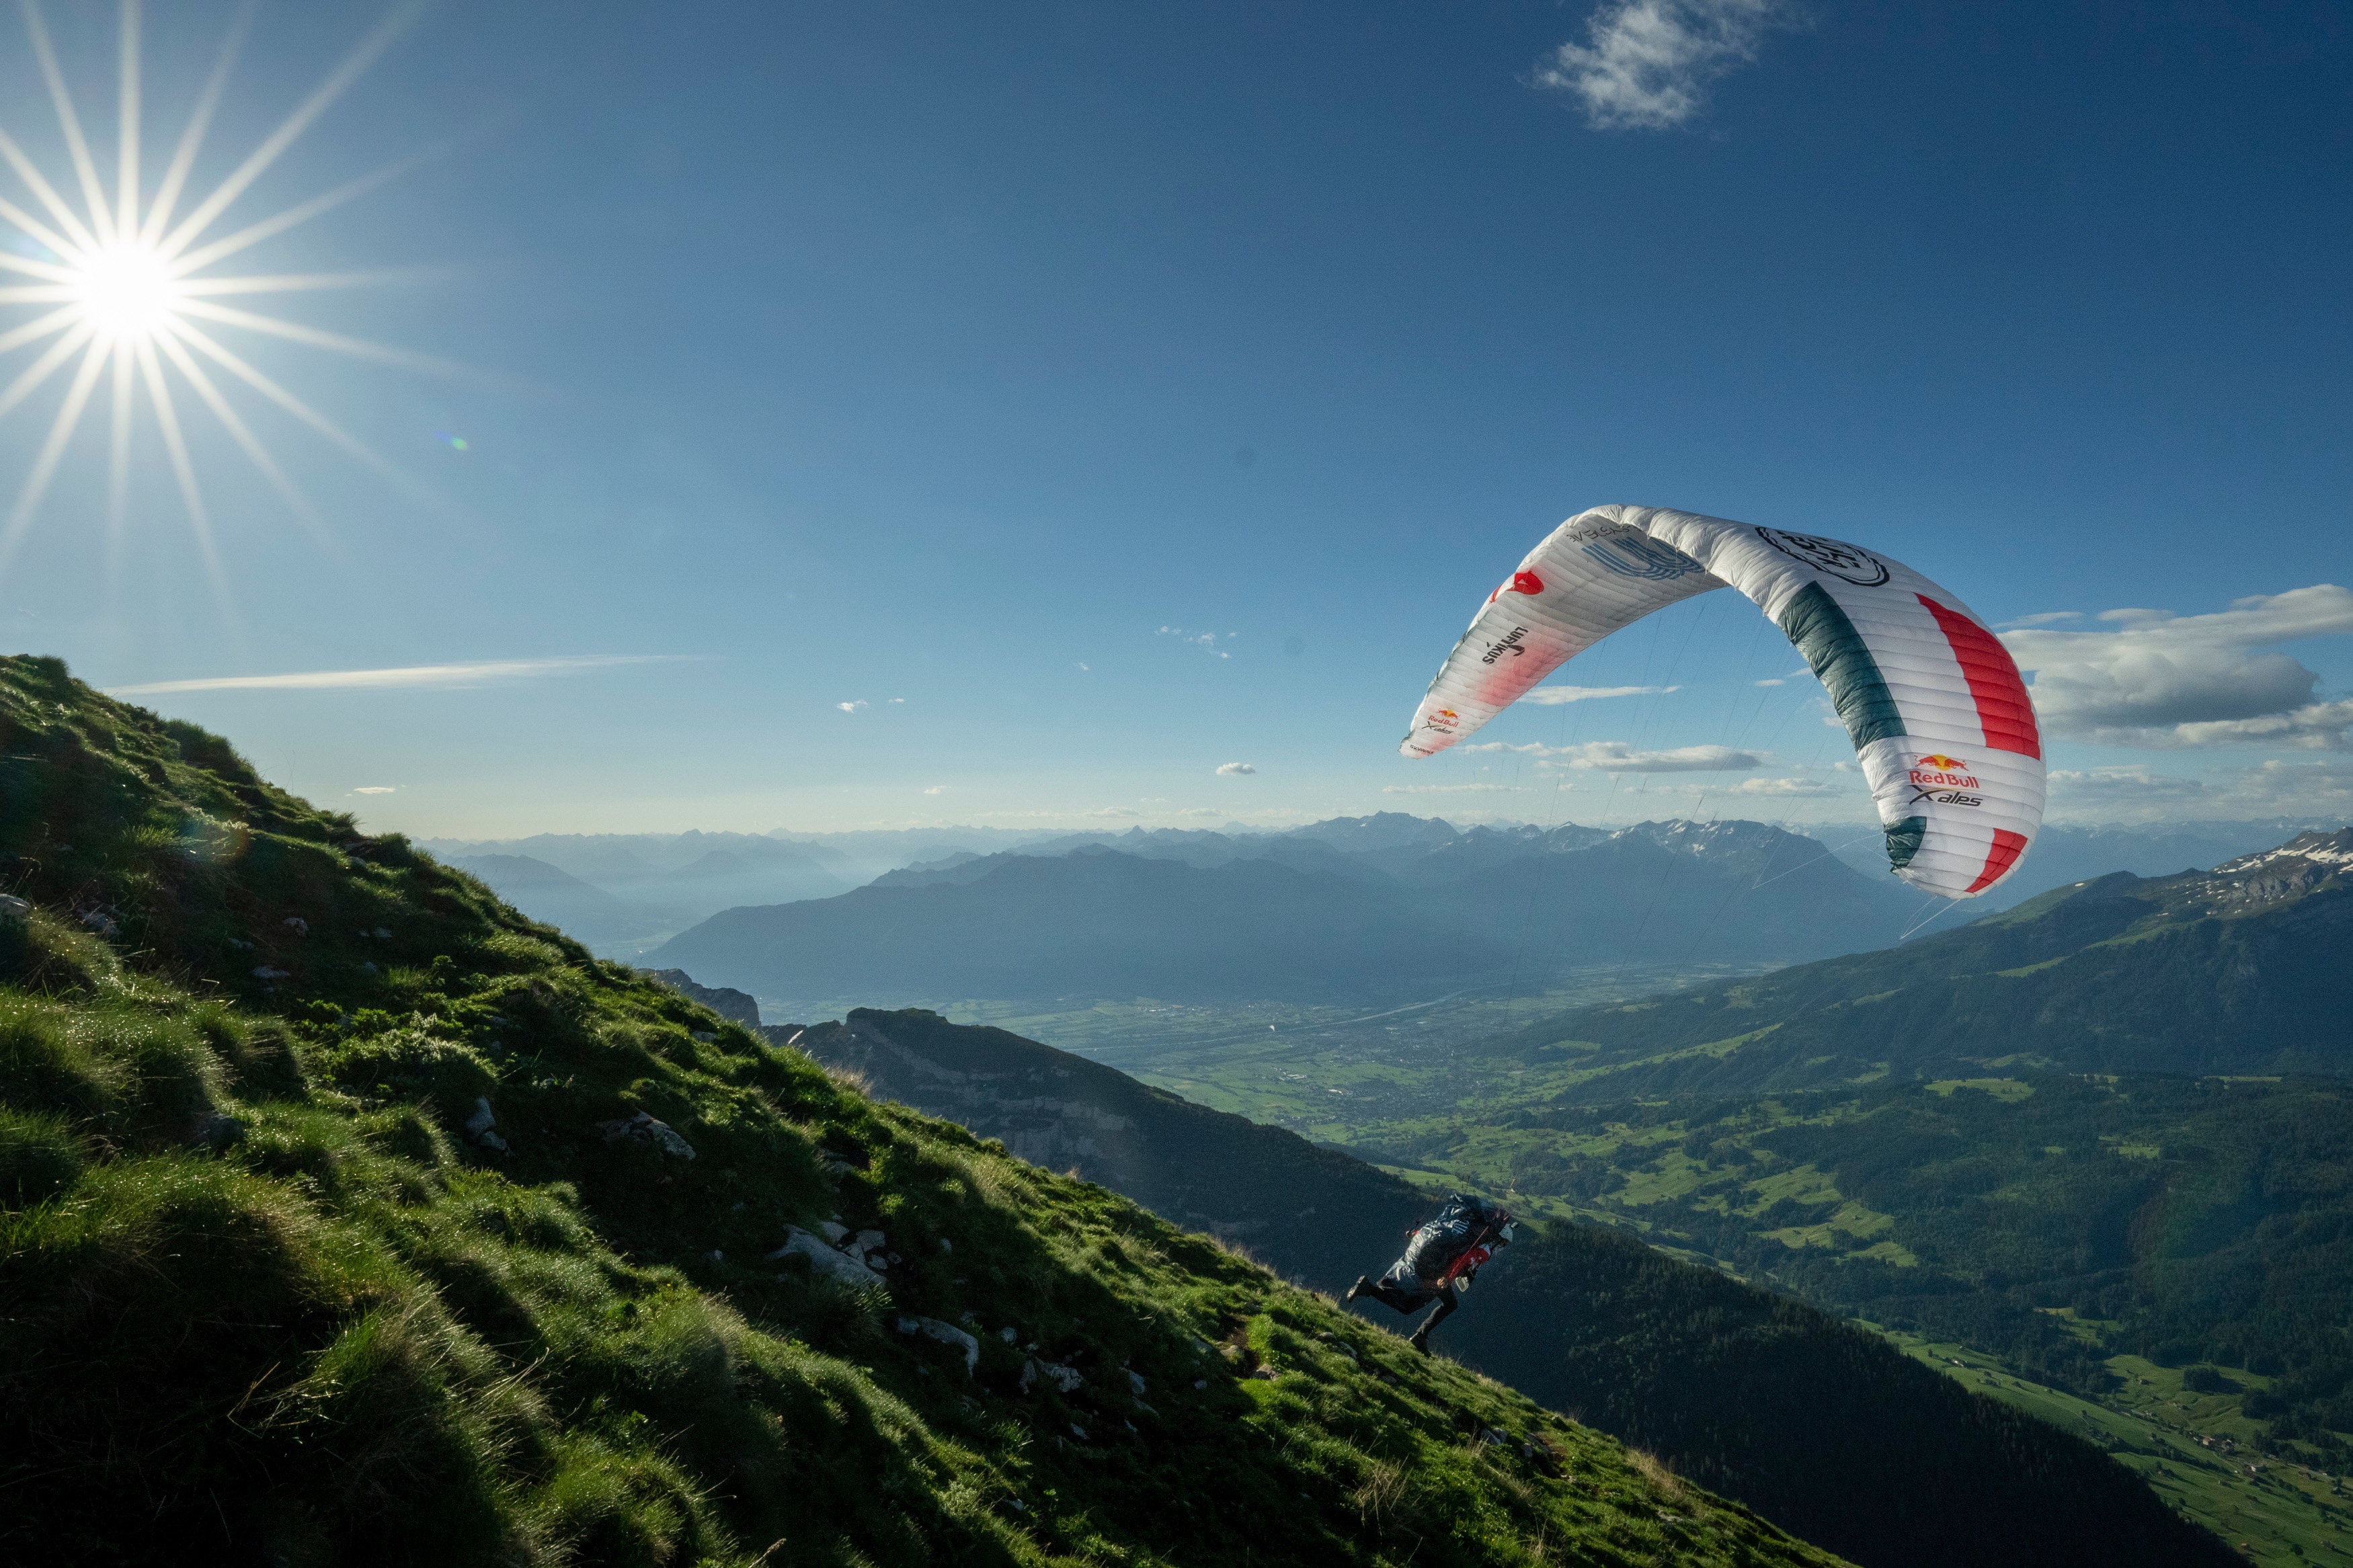 GER2 performs during the Red Bull X-Alps in Wildhaus, Switzerland on June 24, 2021.